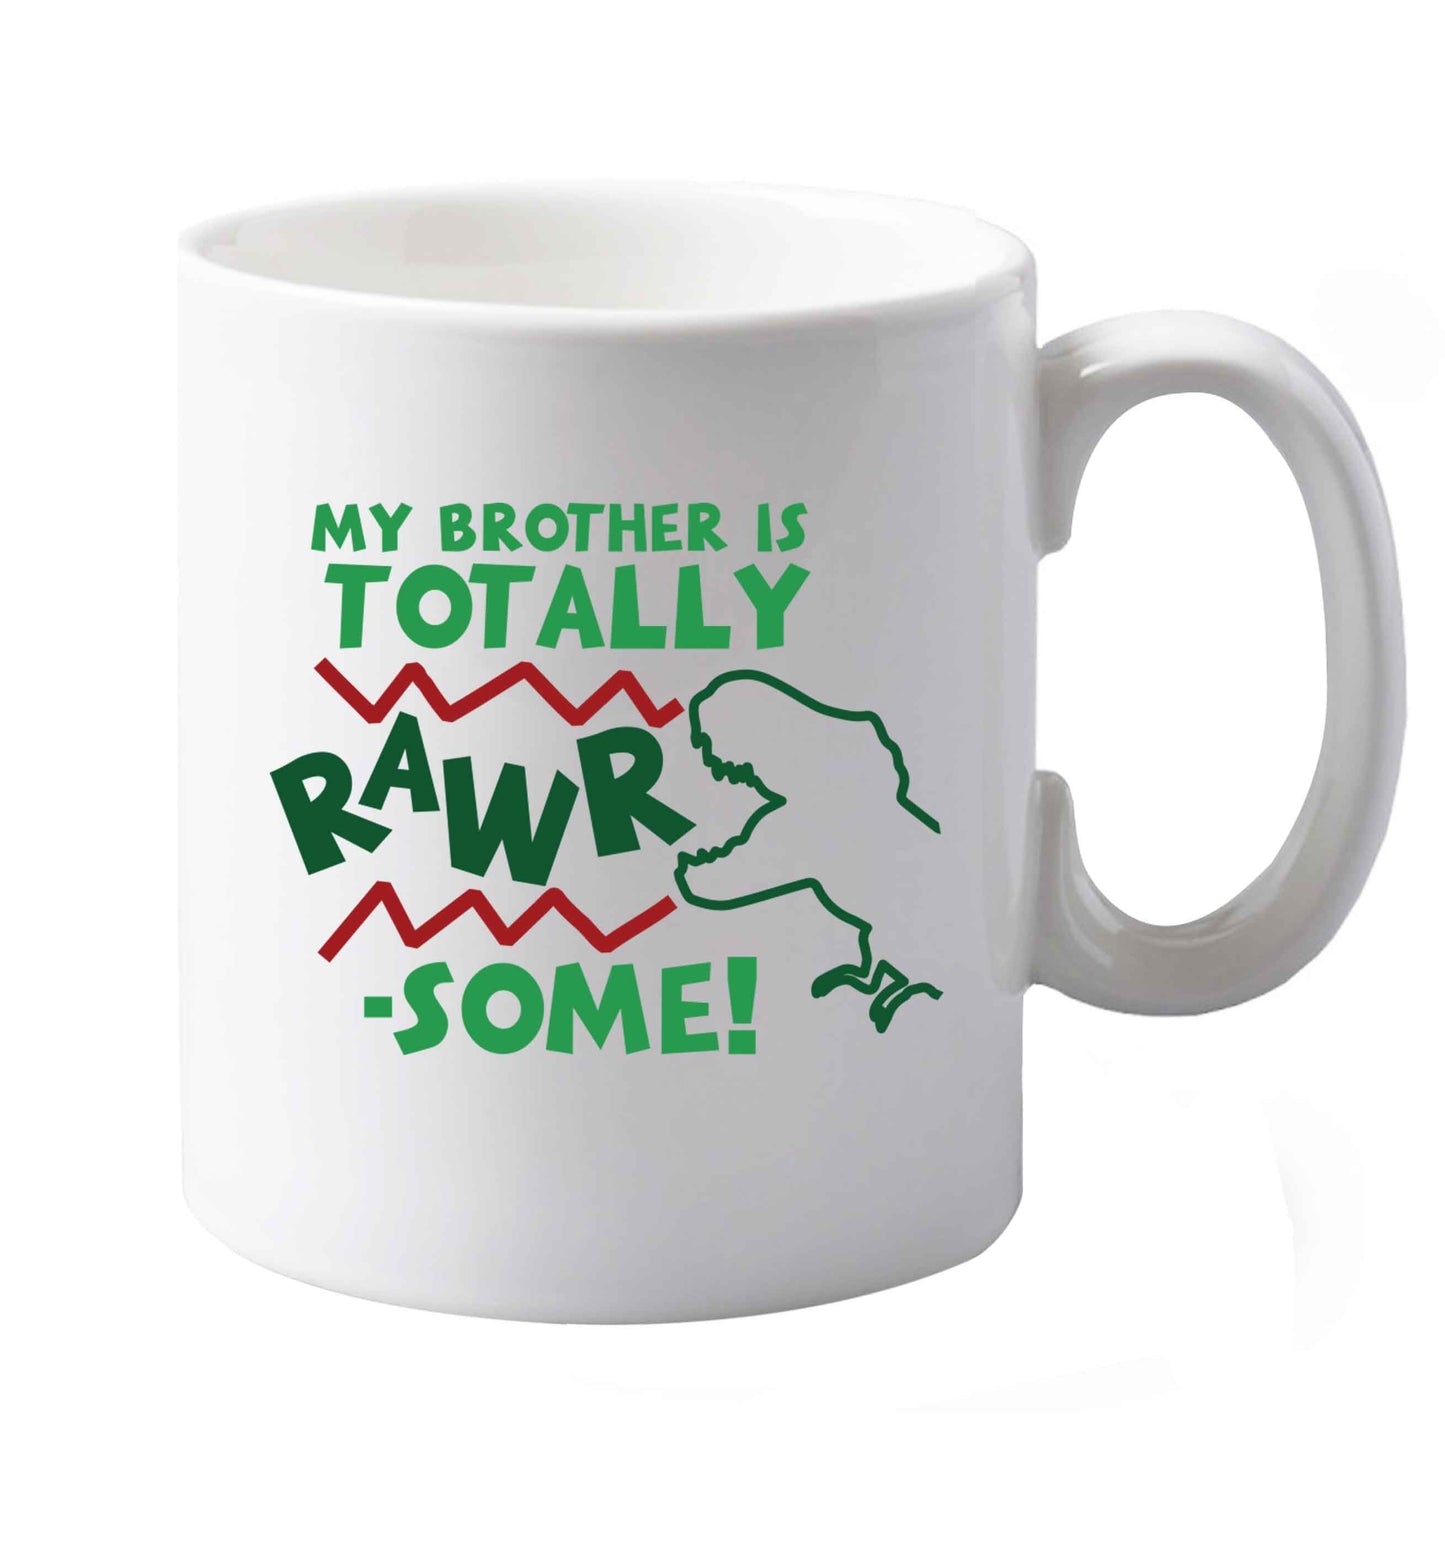 10 oz My brother is totally rawrsome ceramic mug both sides